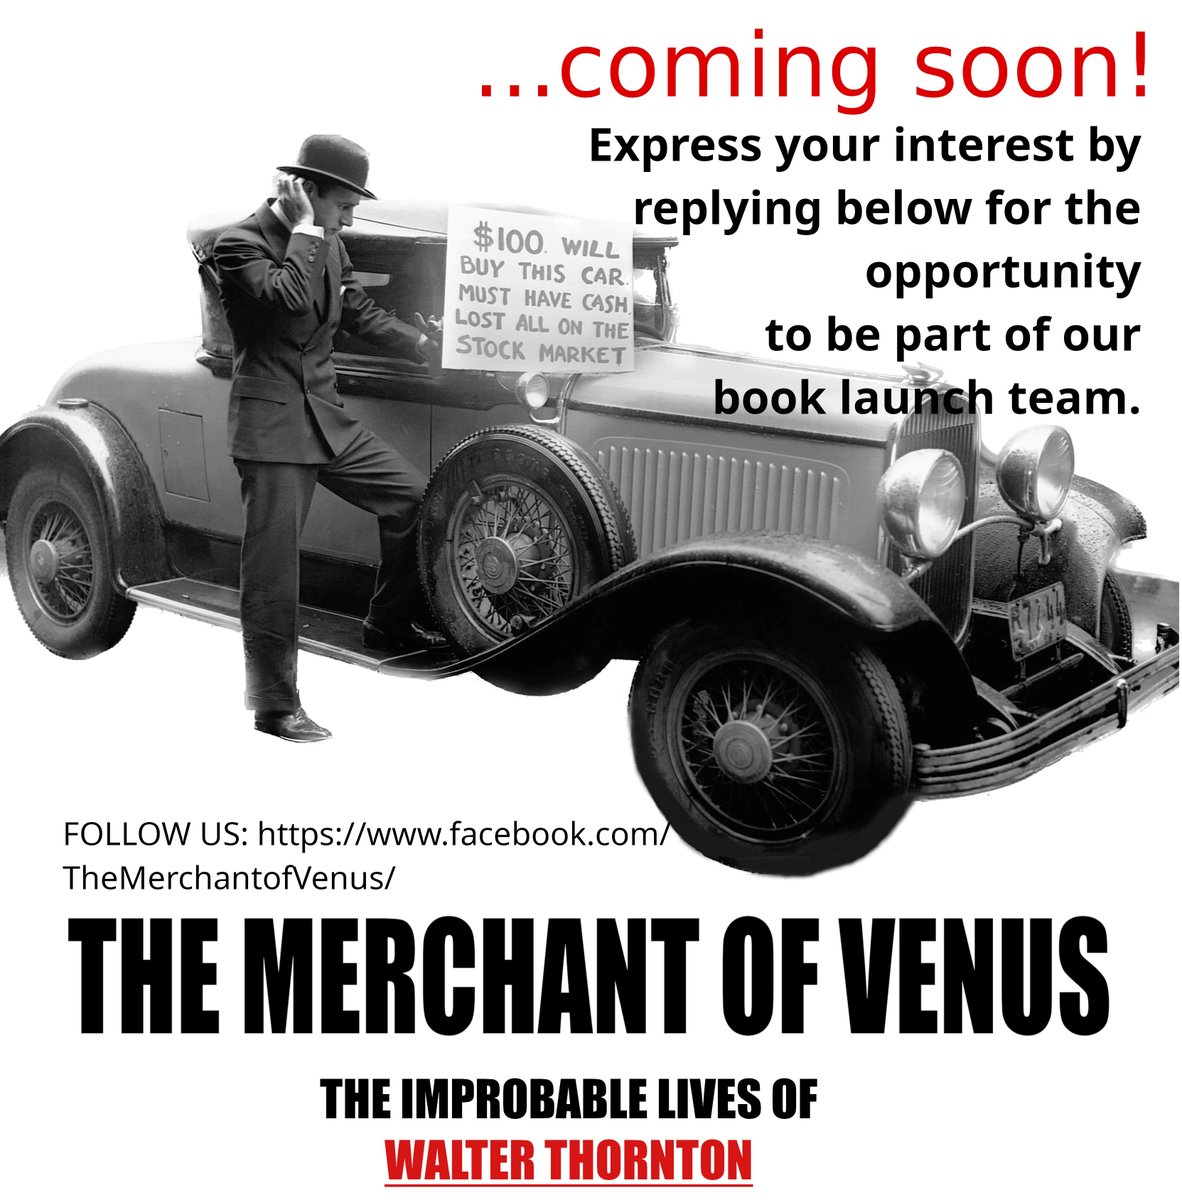 An extraordinary man that will inspire you to get up and do your best after a tragedy has happened to you! #goldenagestar #bookpromotion #themerchanofvenus #pinupgirl #wallstreetcrash #greatdepression #americanhistory #WW2 #Classic #crash1929 #walterthorntonmodels #motivation